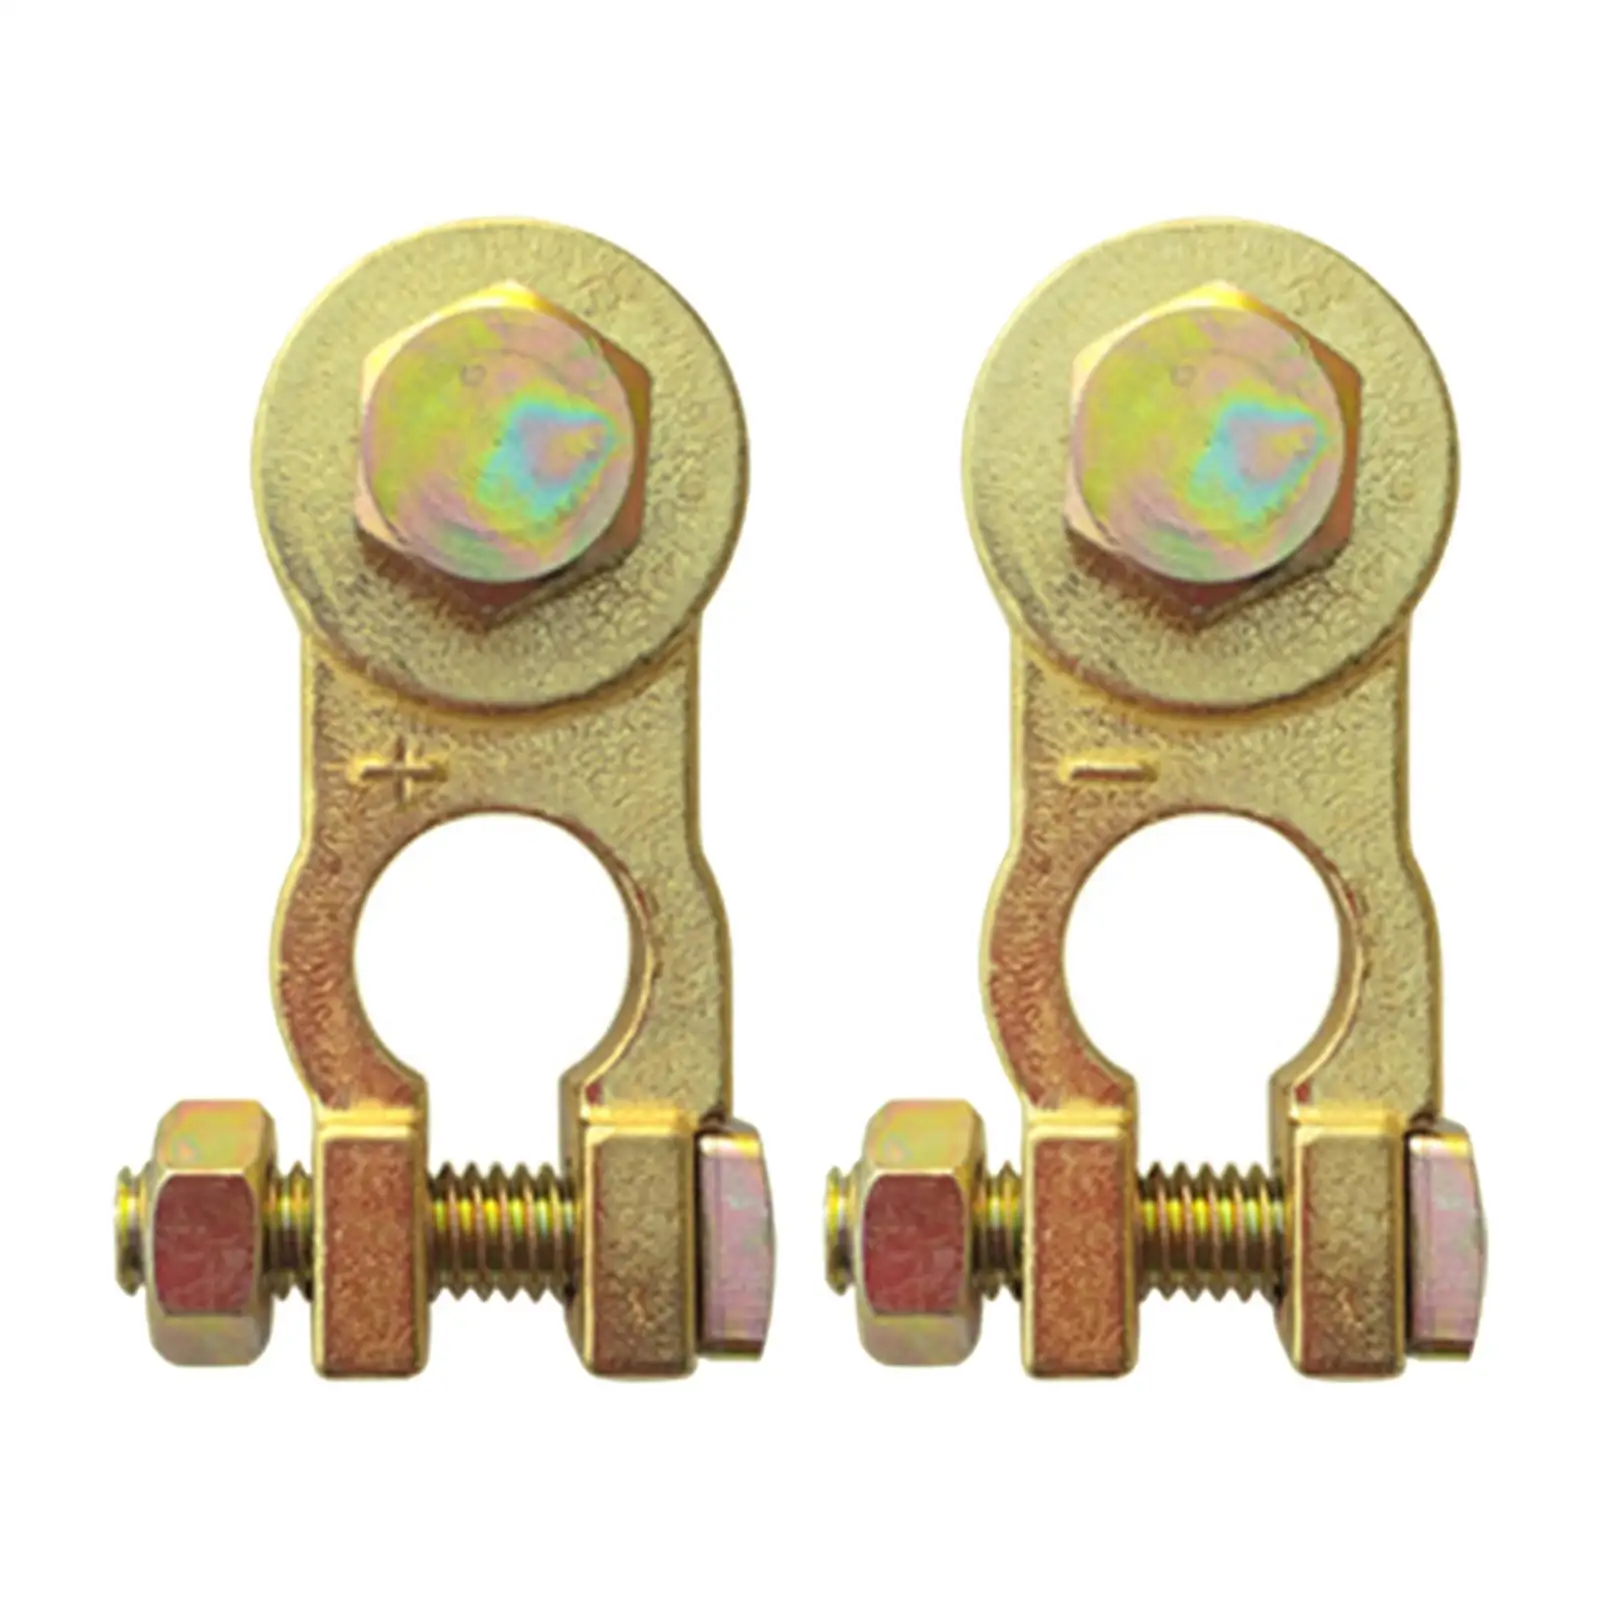 Universal Car Terminals Connector Terminal Protector Quick Release Screw Brass for Boat Vehicles Truck Caravan Automotive